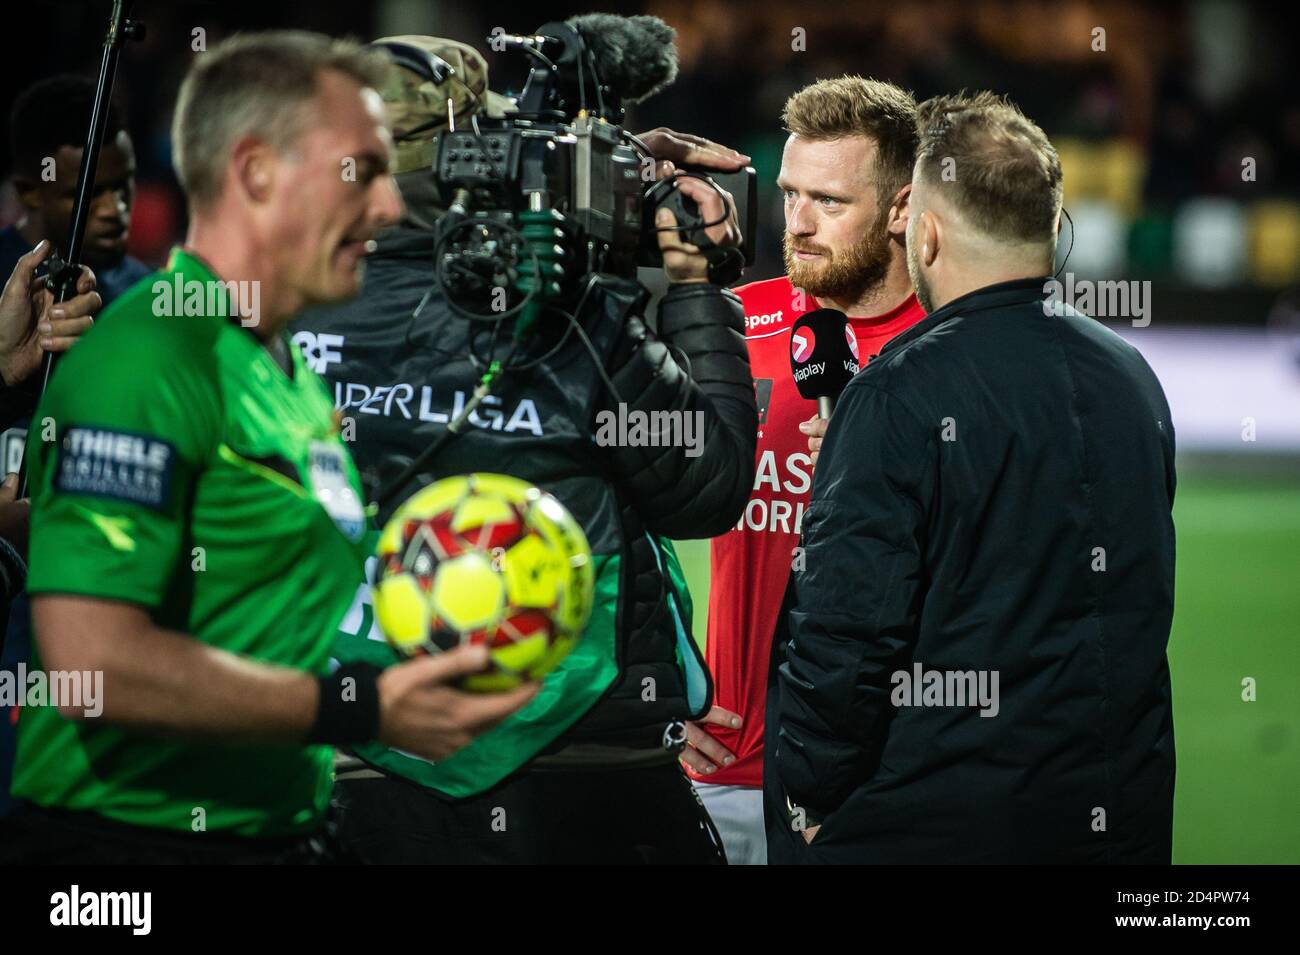 Silkeborg, Denmark. 06th, October 2019. Ronnie Schwartz (29) of Silkeborg IF seen during an interview after the 3F Superliga match between Silkeborg IF and FC Midtjylland at Jysk Park in Silkeborg. (Photo credit: Gonzales Photo - Morten Kjaer). Stock Photo